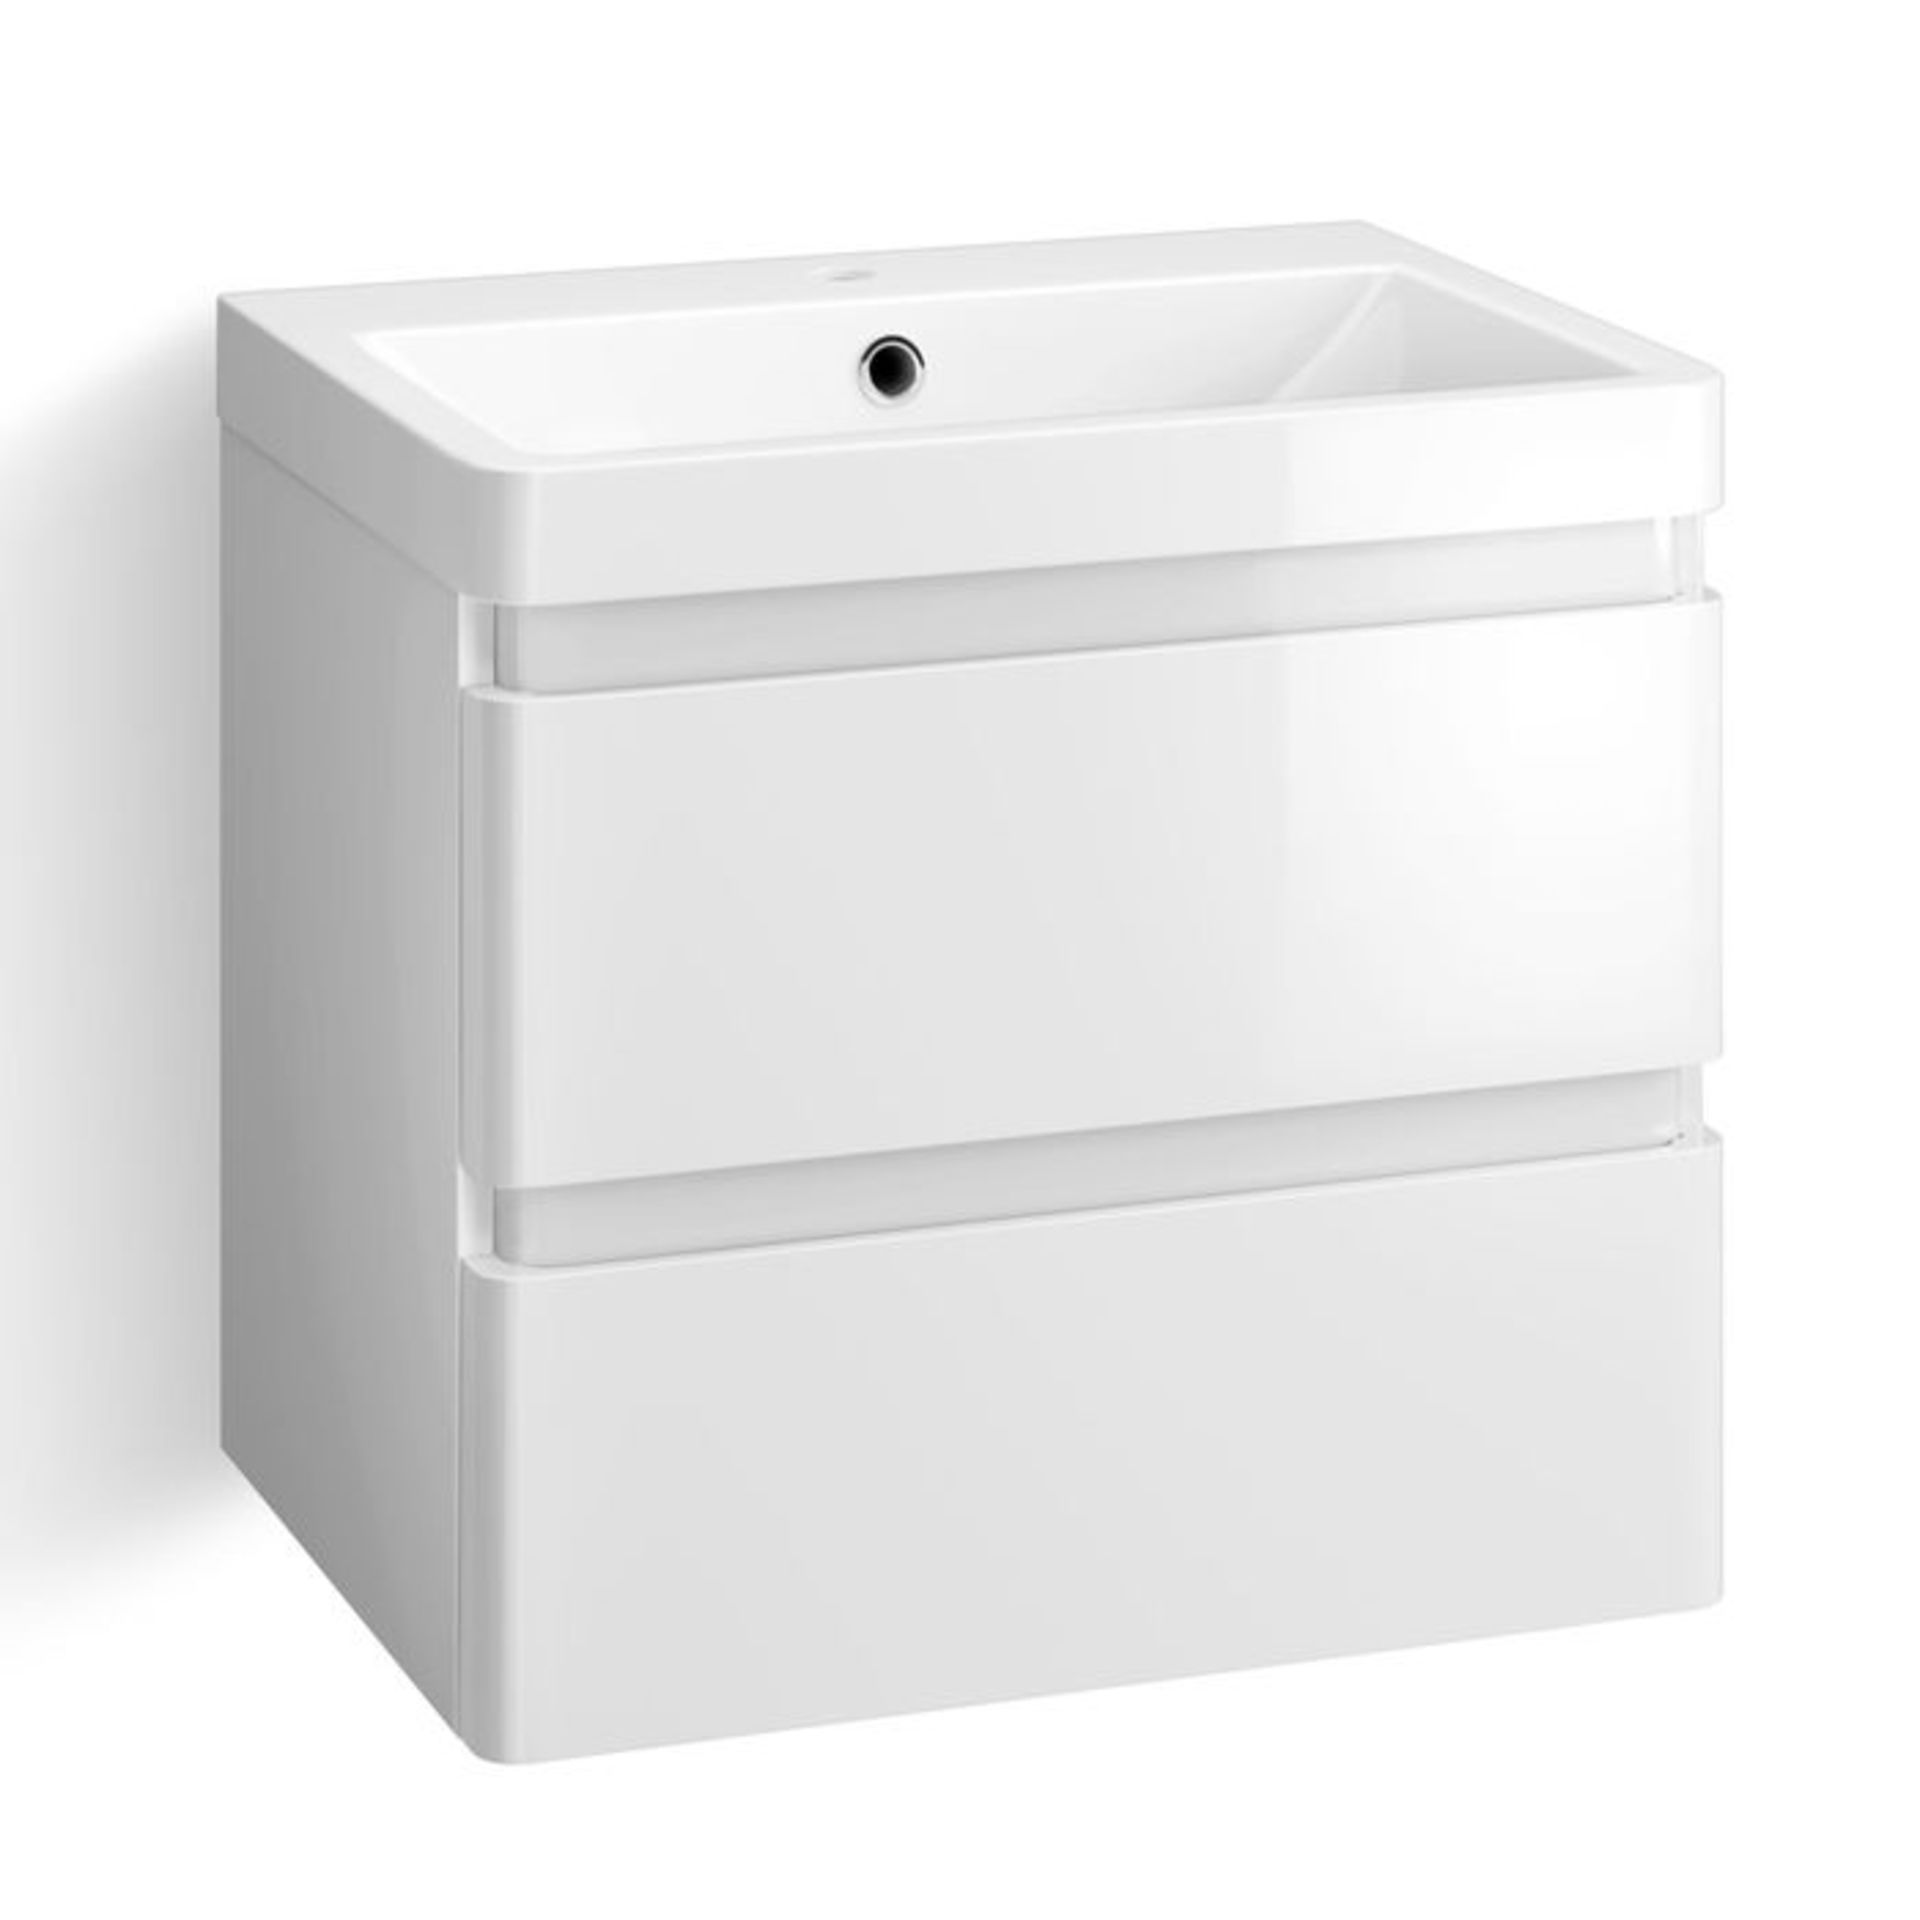 (RK31) 600mm Denver Gloss White Built In Sink Drawer Unit - Wall Hung. RRP £499.99. Comes comp... - Image 4 of 4